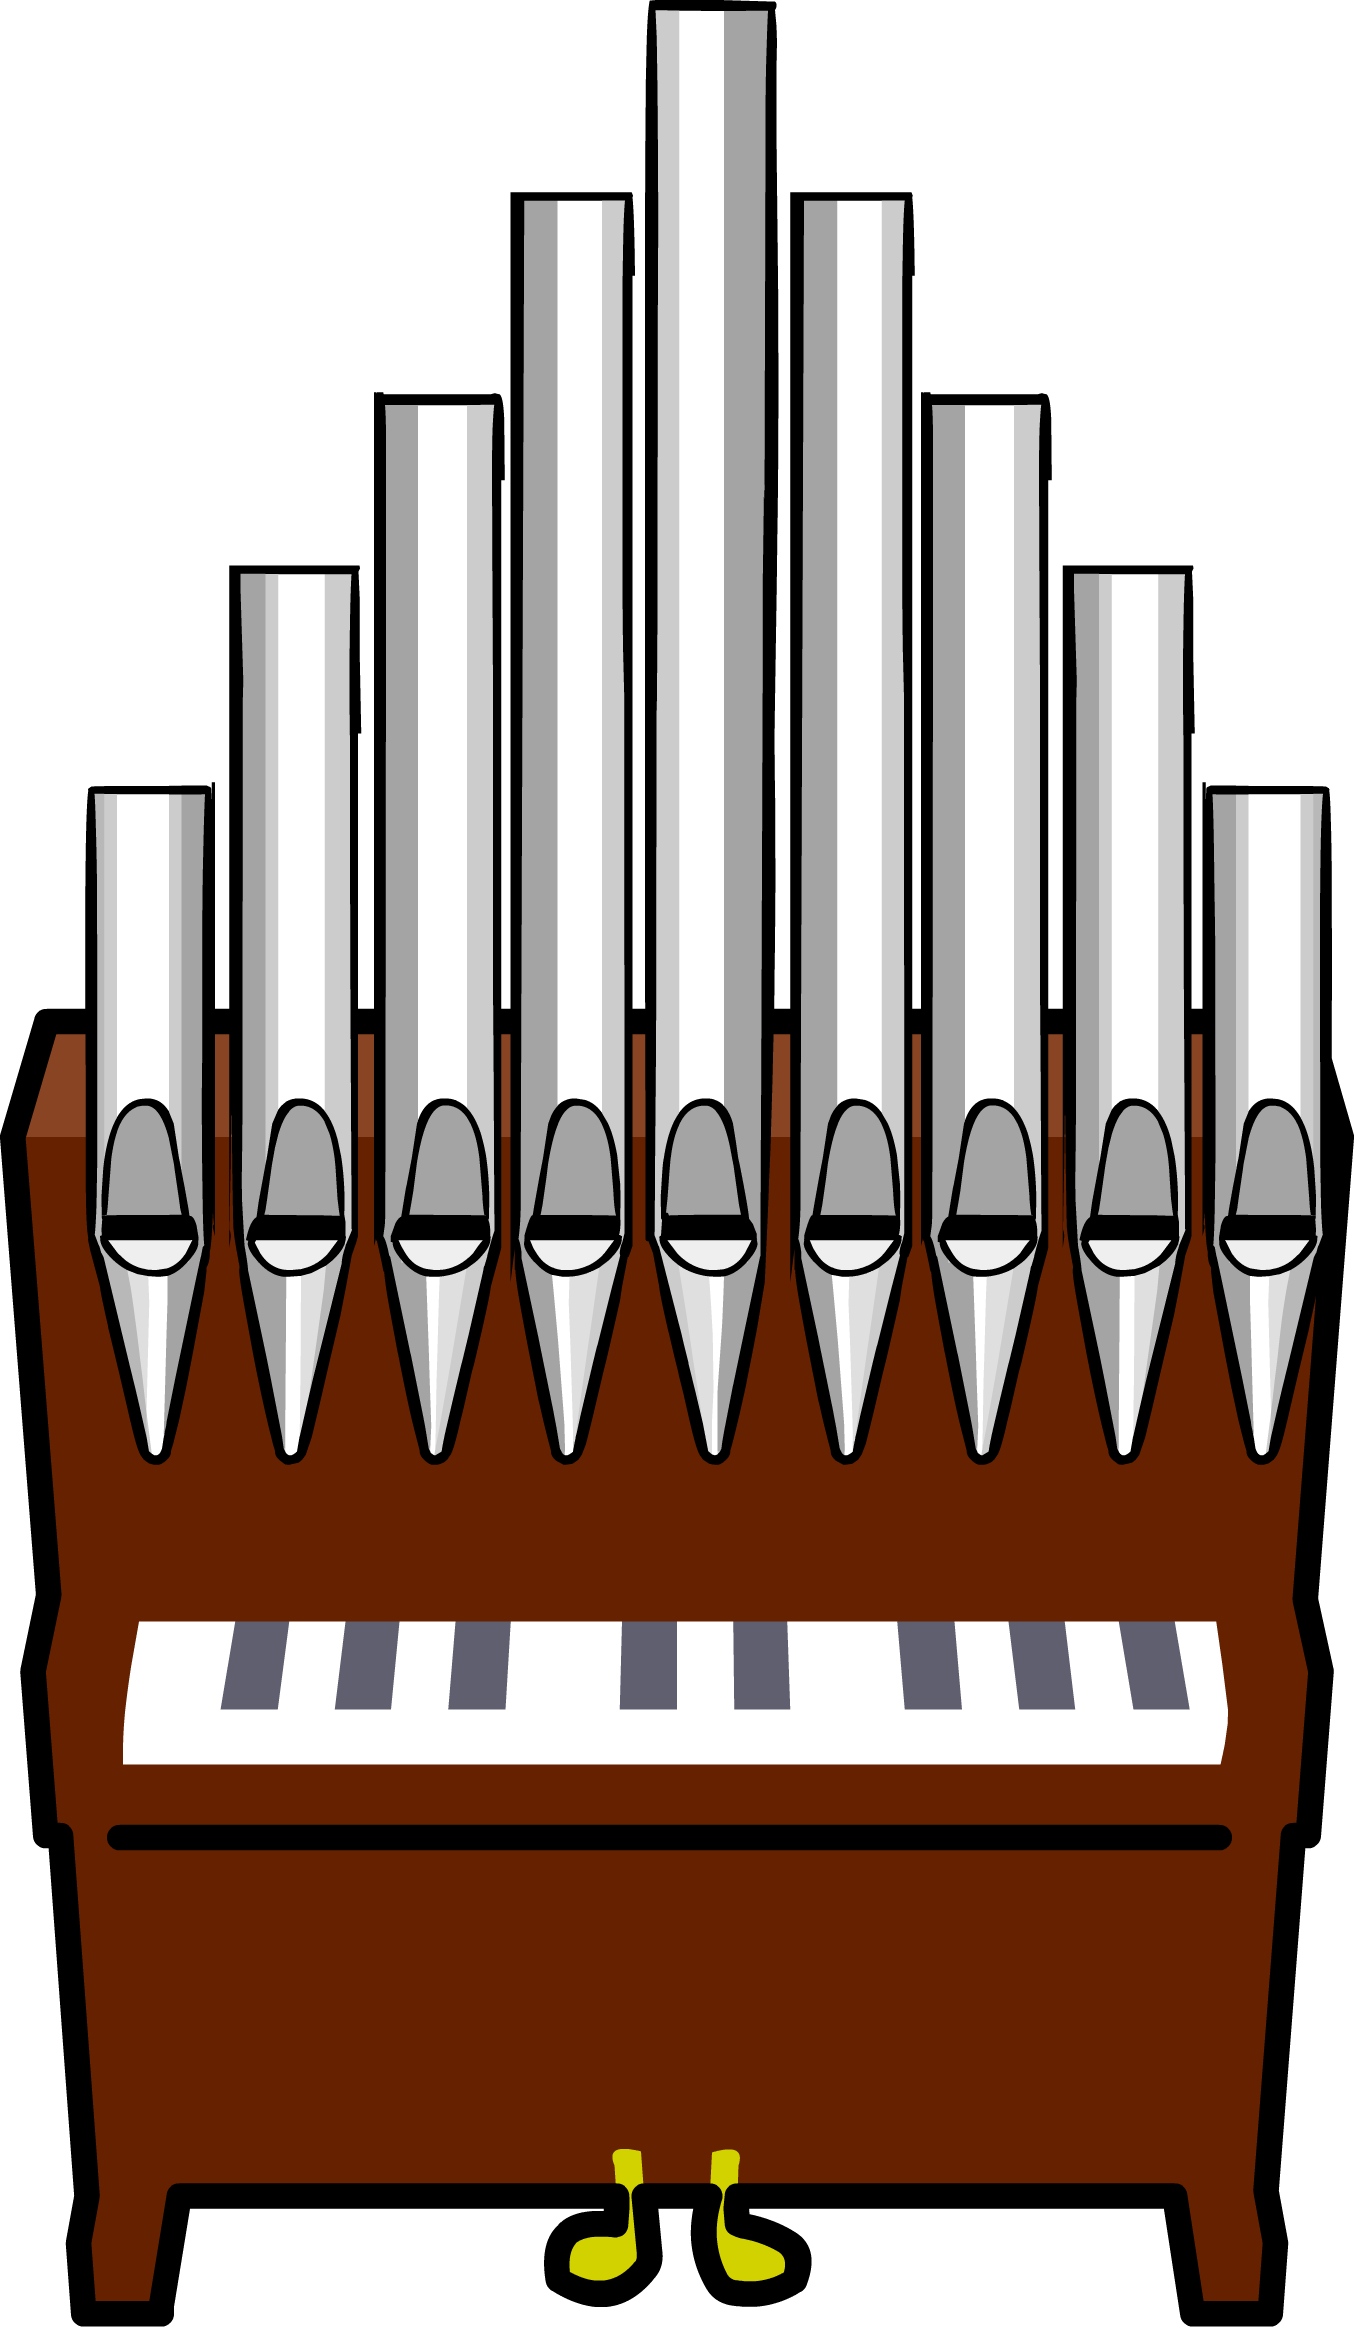 Image - Pipe Organ.PNG | Club Penguin Wiki | FANDOM powered by Wikia